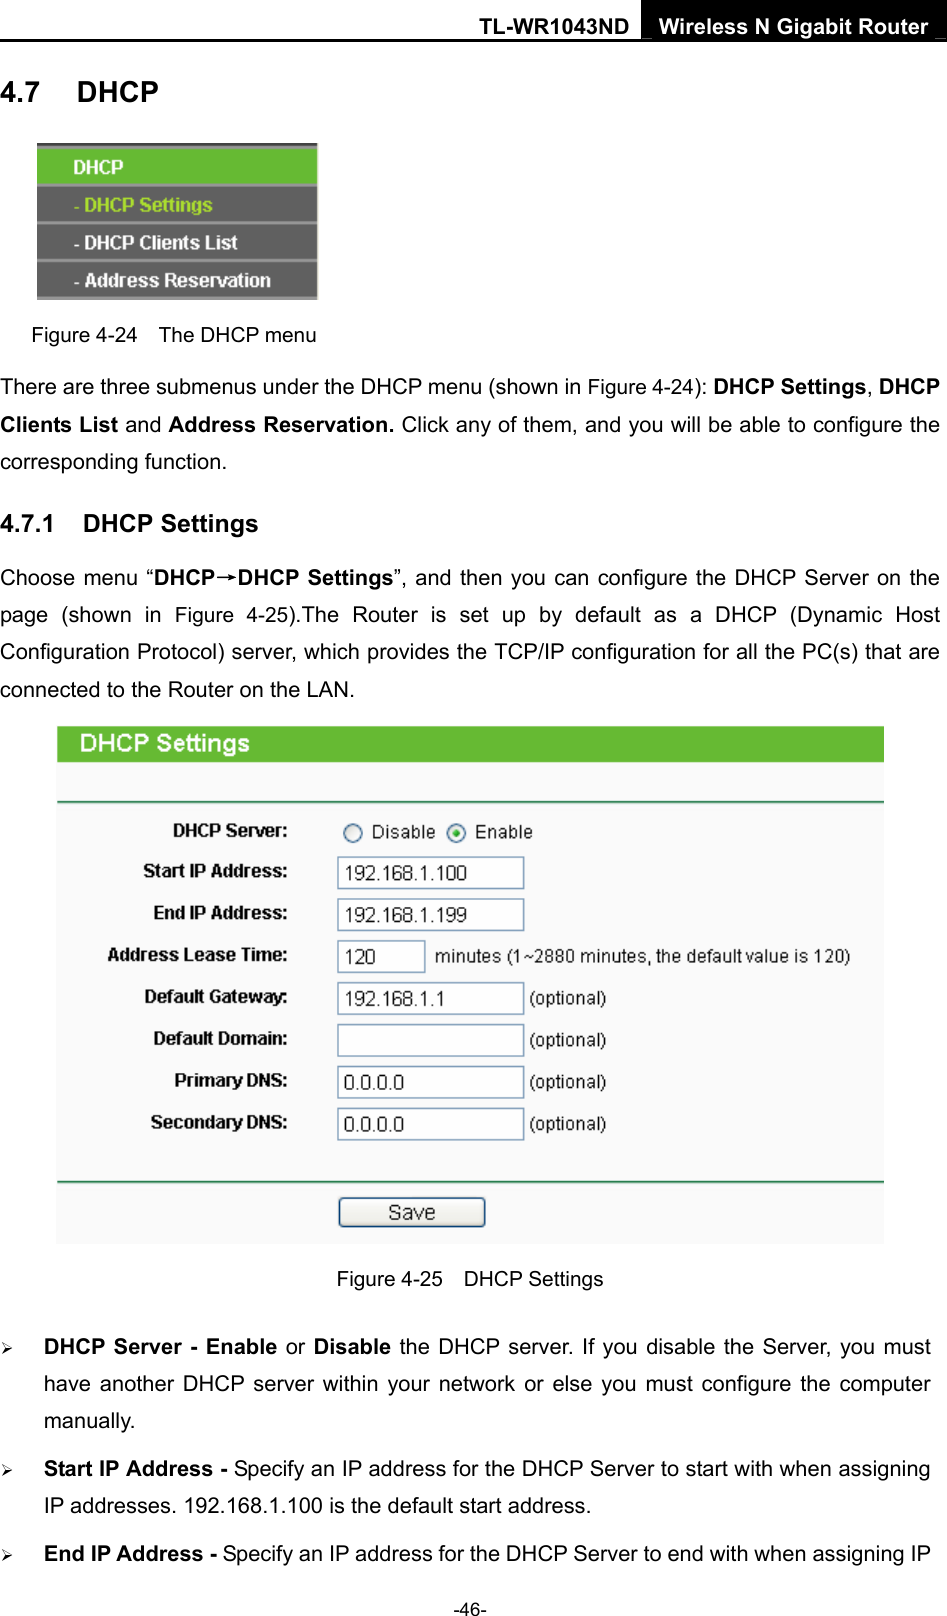 TL-WR1043ND Wireless N Gigabit Router  -46- 4.7  DHCP  Figure 4-24    The DHCP menu There are three submenus under the DHCP menu (shown in Figure 4-24): DHCP Settings, DHCP Clients List and Address Reservation. Click any of them, and you will be able to configure the corresponding function. 4.7.1  DHCP Settings Choose menu “DHCP→DHCP Settings”, and then you can configure the DHCP Server on the page (shown in Figure 4-25).The Router is set up by default as a DHCP (Dynamic Host Configuration Protocol) server, which provides the TCP/IP configuration for all the PC(s) that are connected to the Router on the LAN.    Figure 4-25  DHCP Settings ¾ DHCP Server - Enable or Disable the DHCP server. If you disable the Server, you must have another DHCP server within your network or else you must configure the computer manually. ¾ Start IP Address - Specify an IP address for the DHCP Server to start with when assigning IP addresses. 192.168.1.100 is the default start address. ¾ End IP Address - Specify an IP address for the DHCP Server to end with when assigning IP 